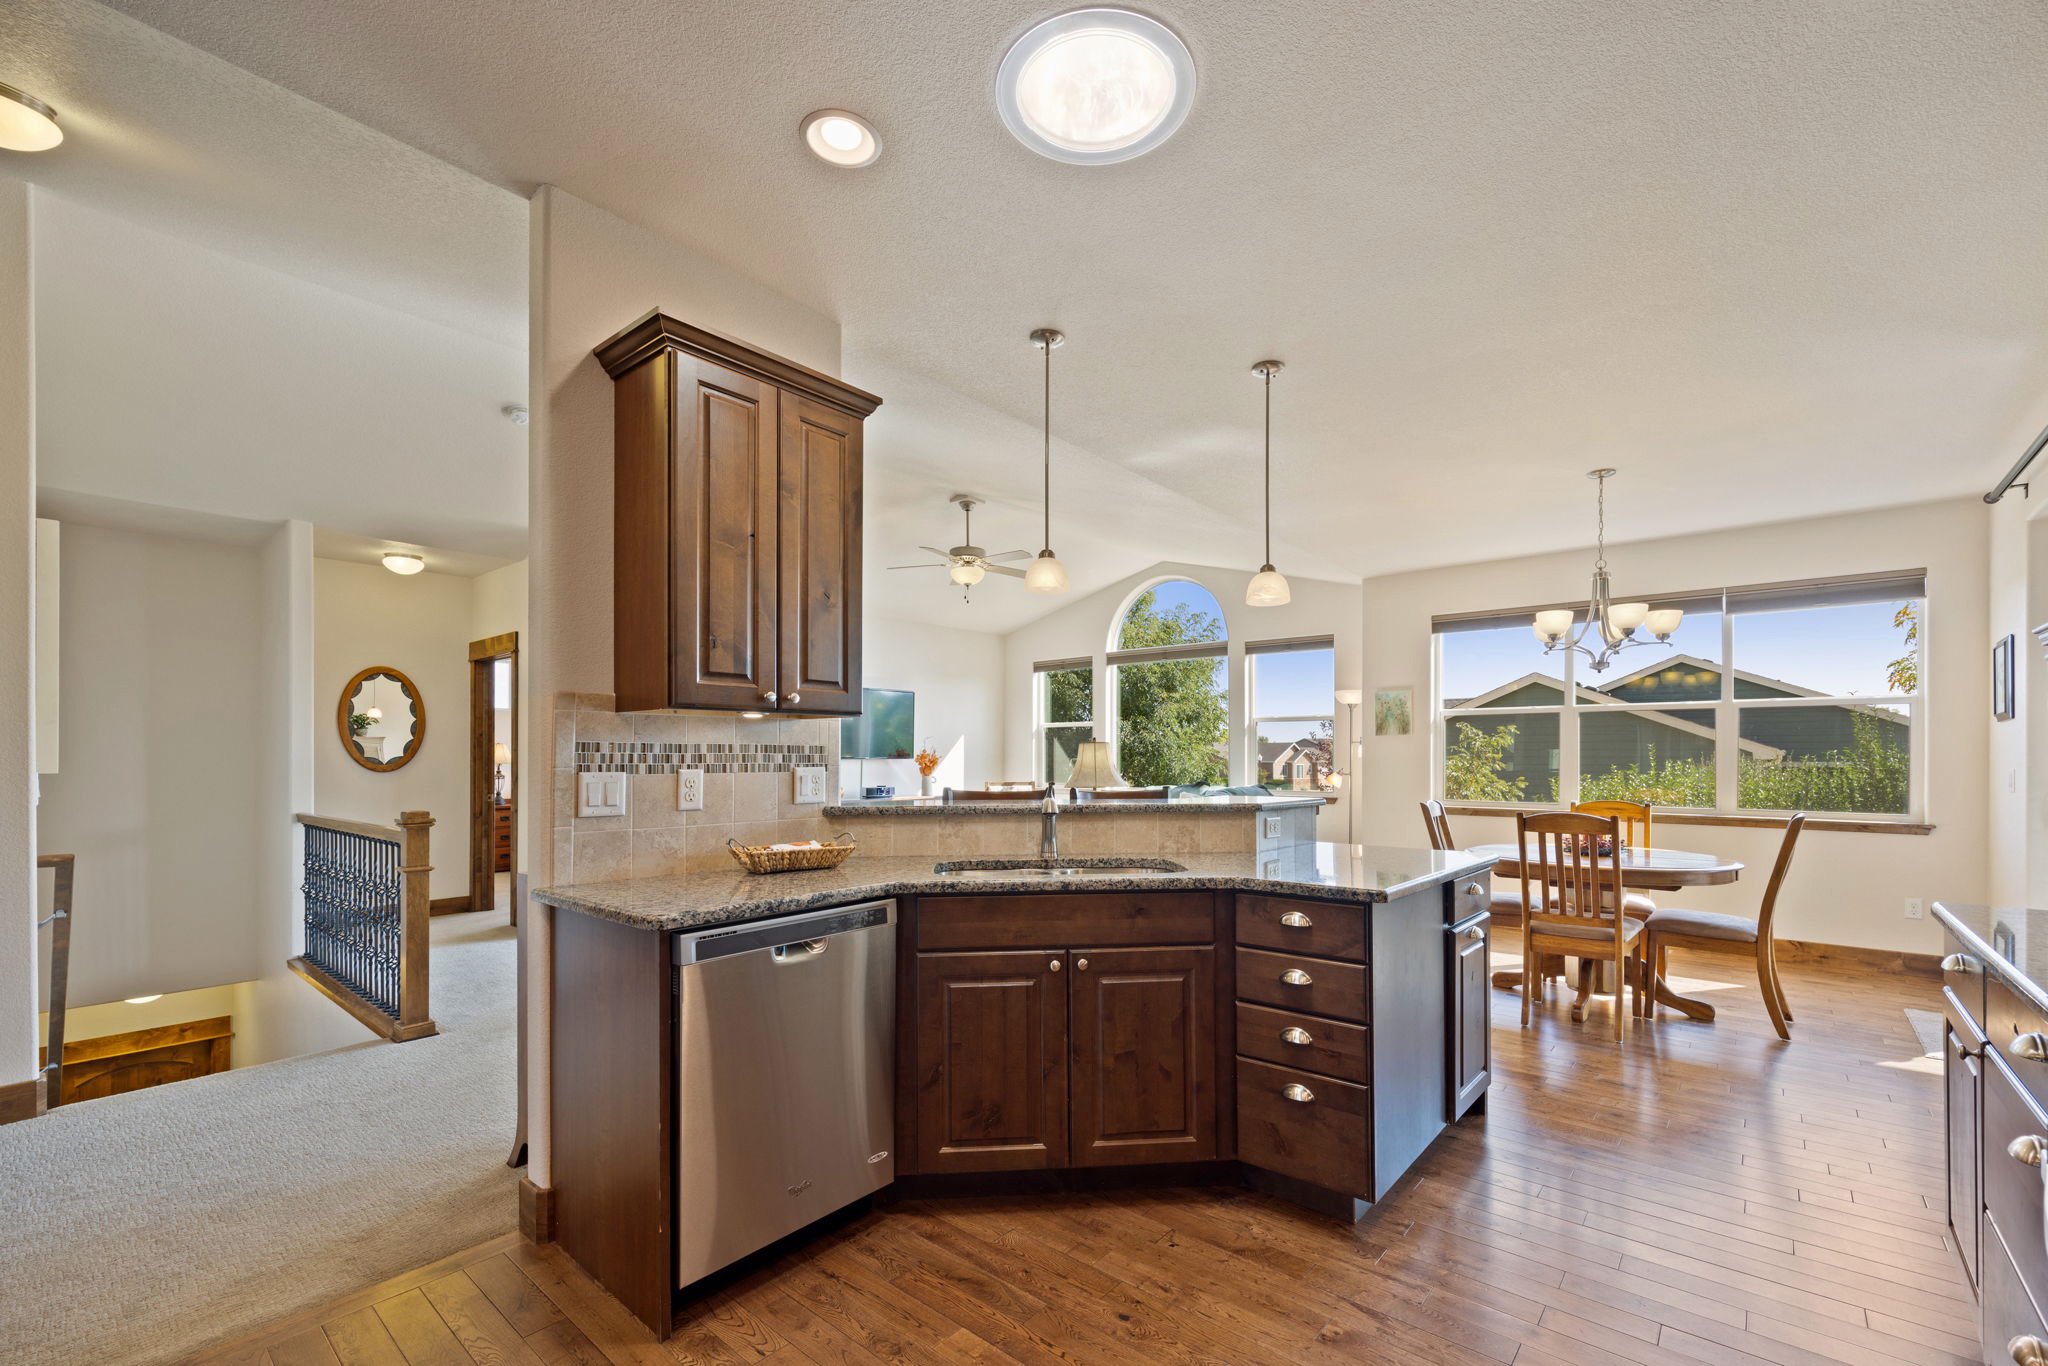 Quality and Craftsmanship Abound - Alder Cabinets, Solid Core Doors &amp; Trim